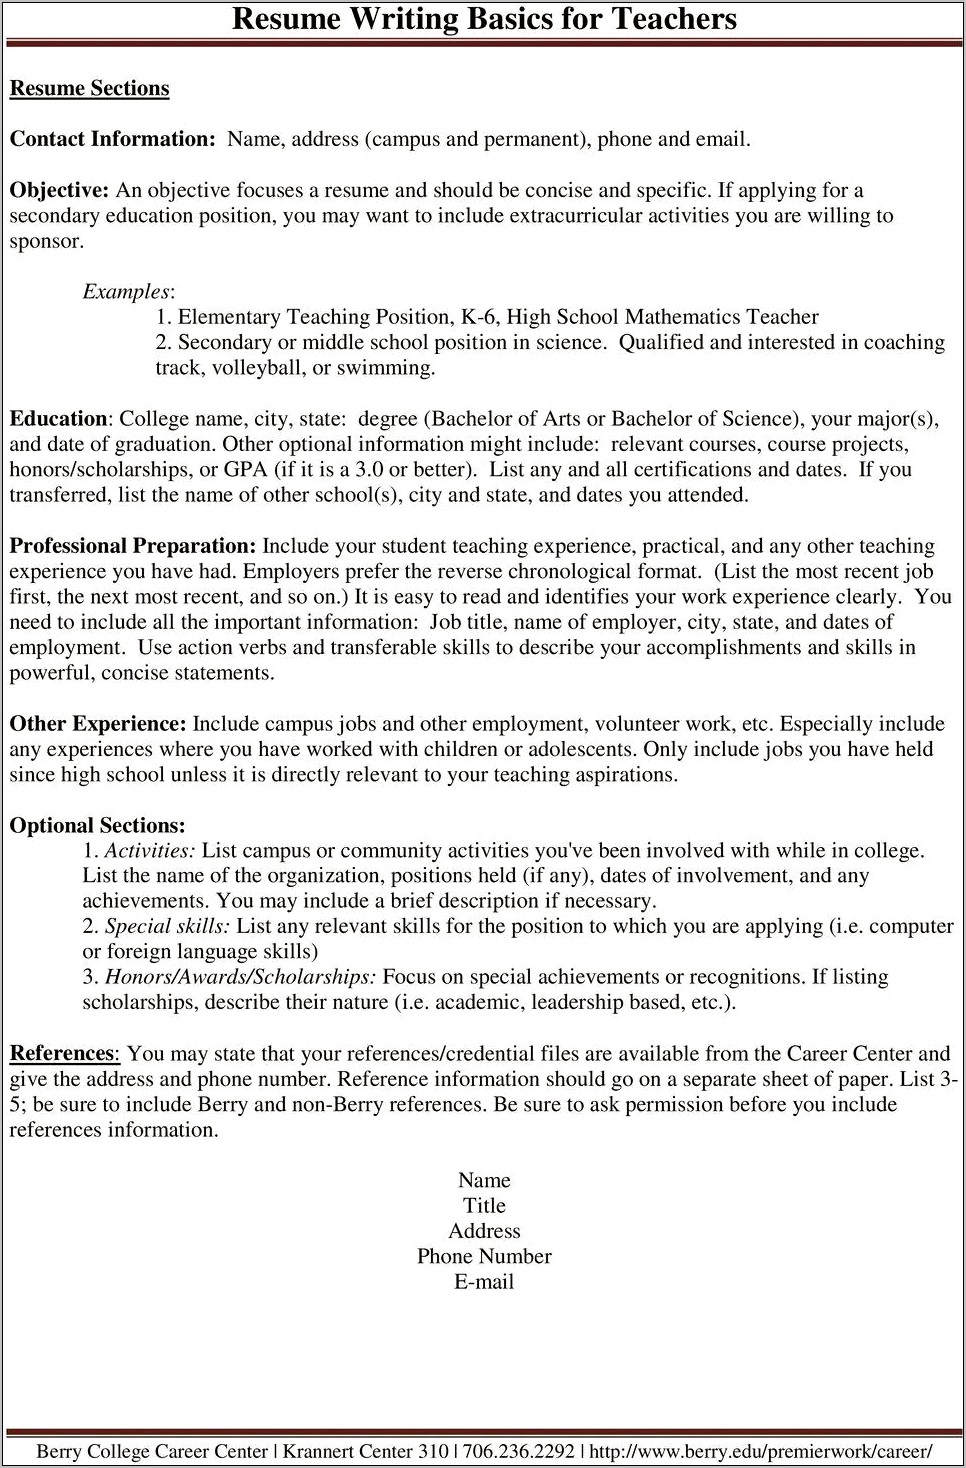 Resume Writers For Science Jobs